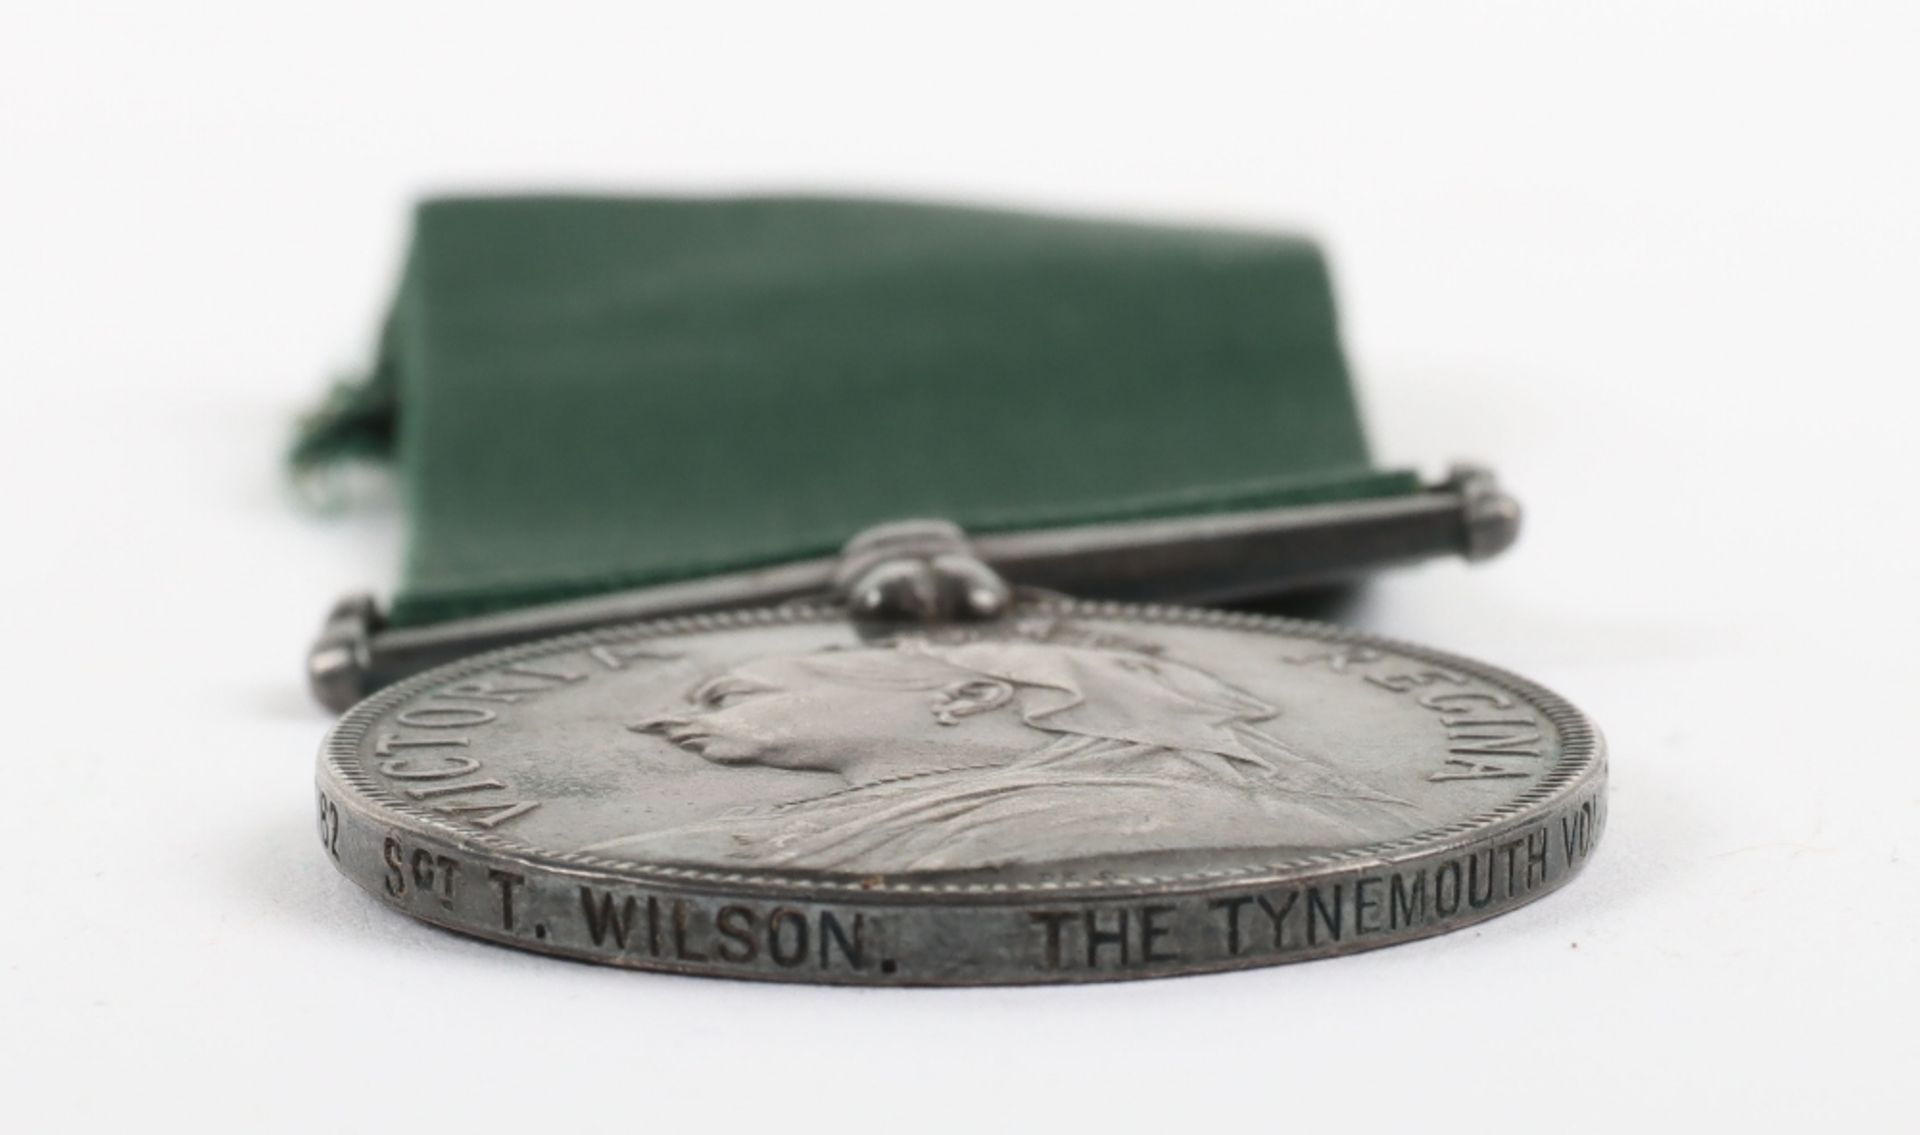 Victorian Volunteer Forces Long Service Medal to the Tynemouth Volunteer Artillery - Image 3 of 3